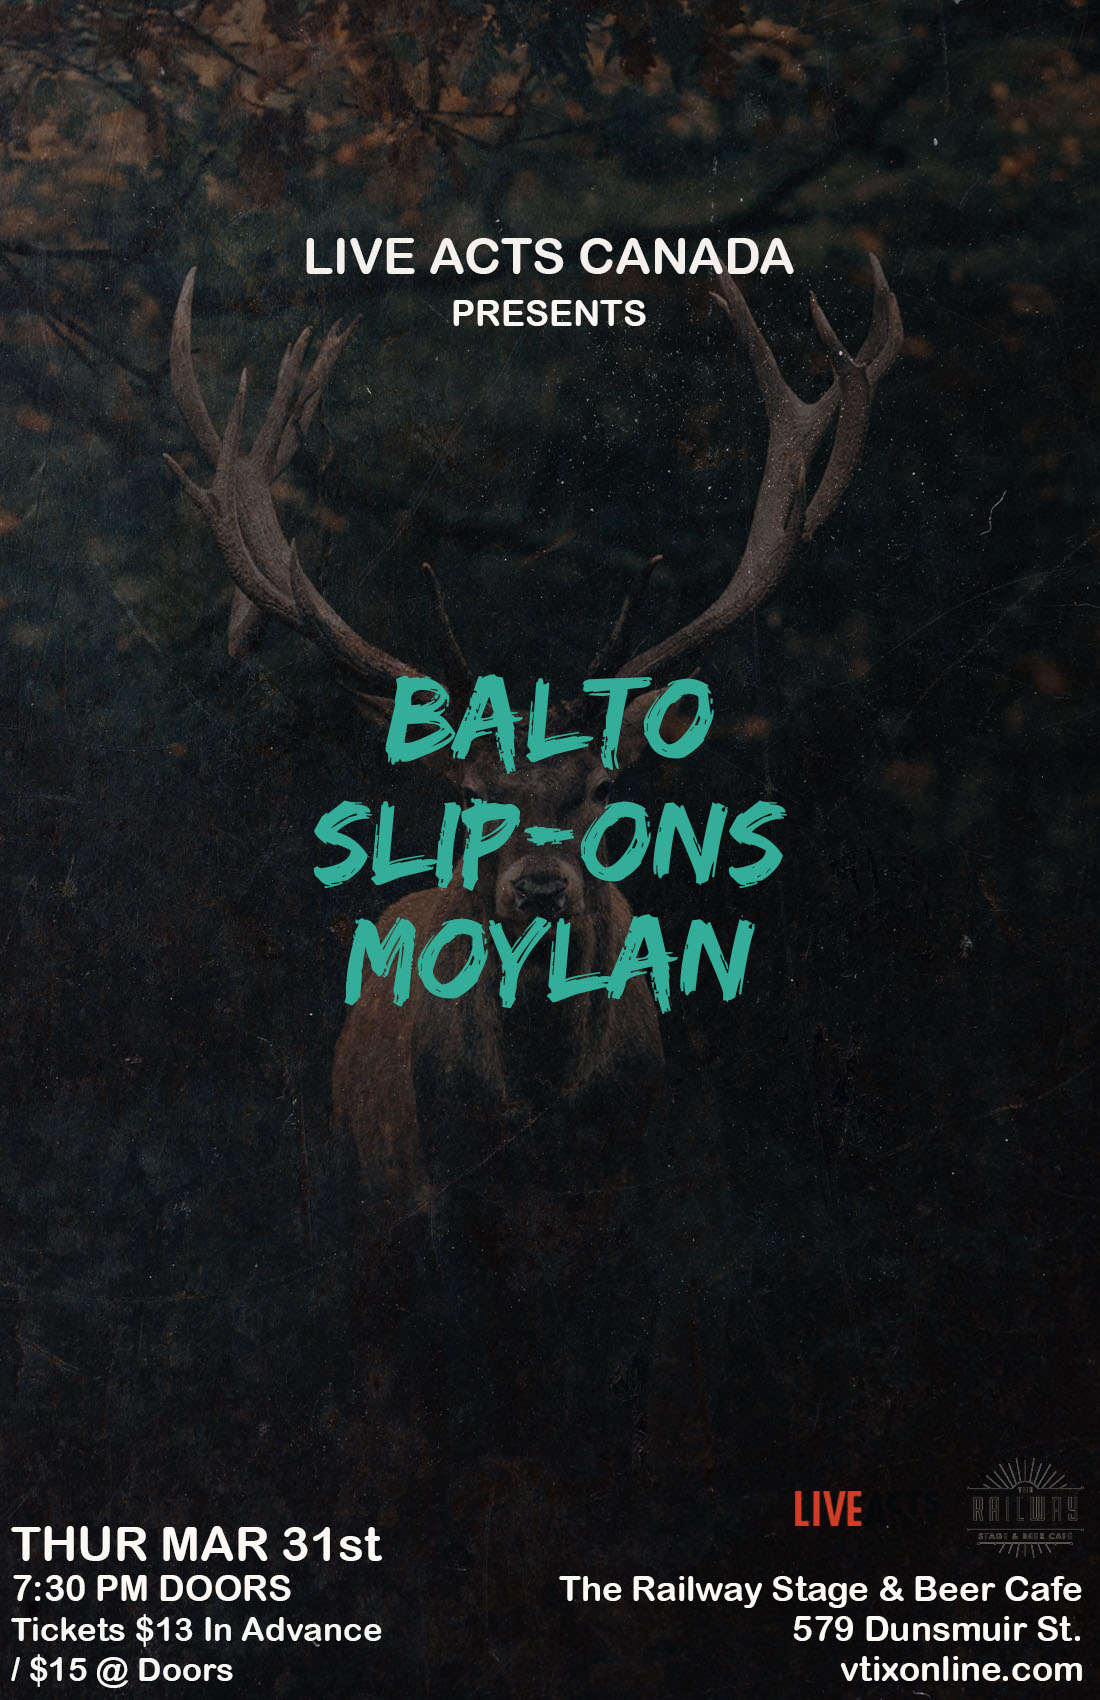 Balto With Special Guests, SLIP-ons + Moylan